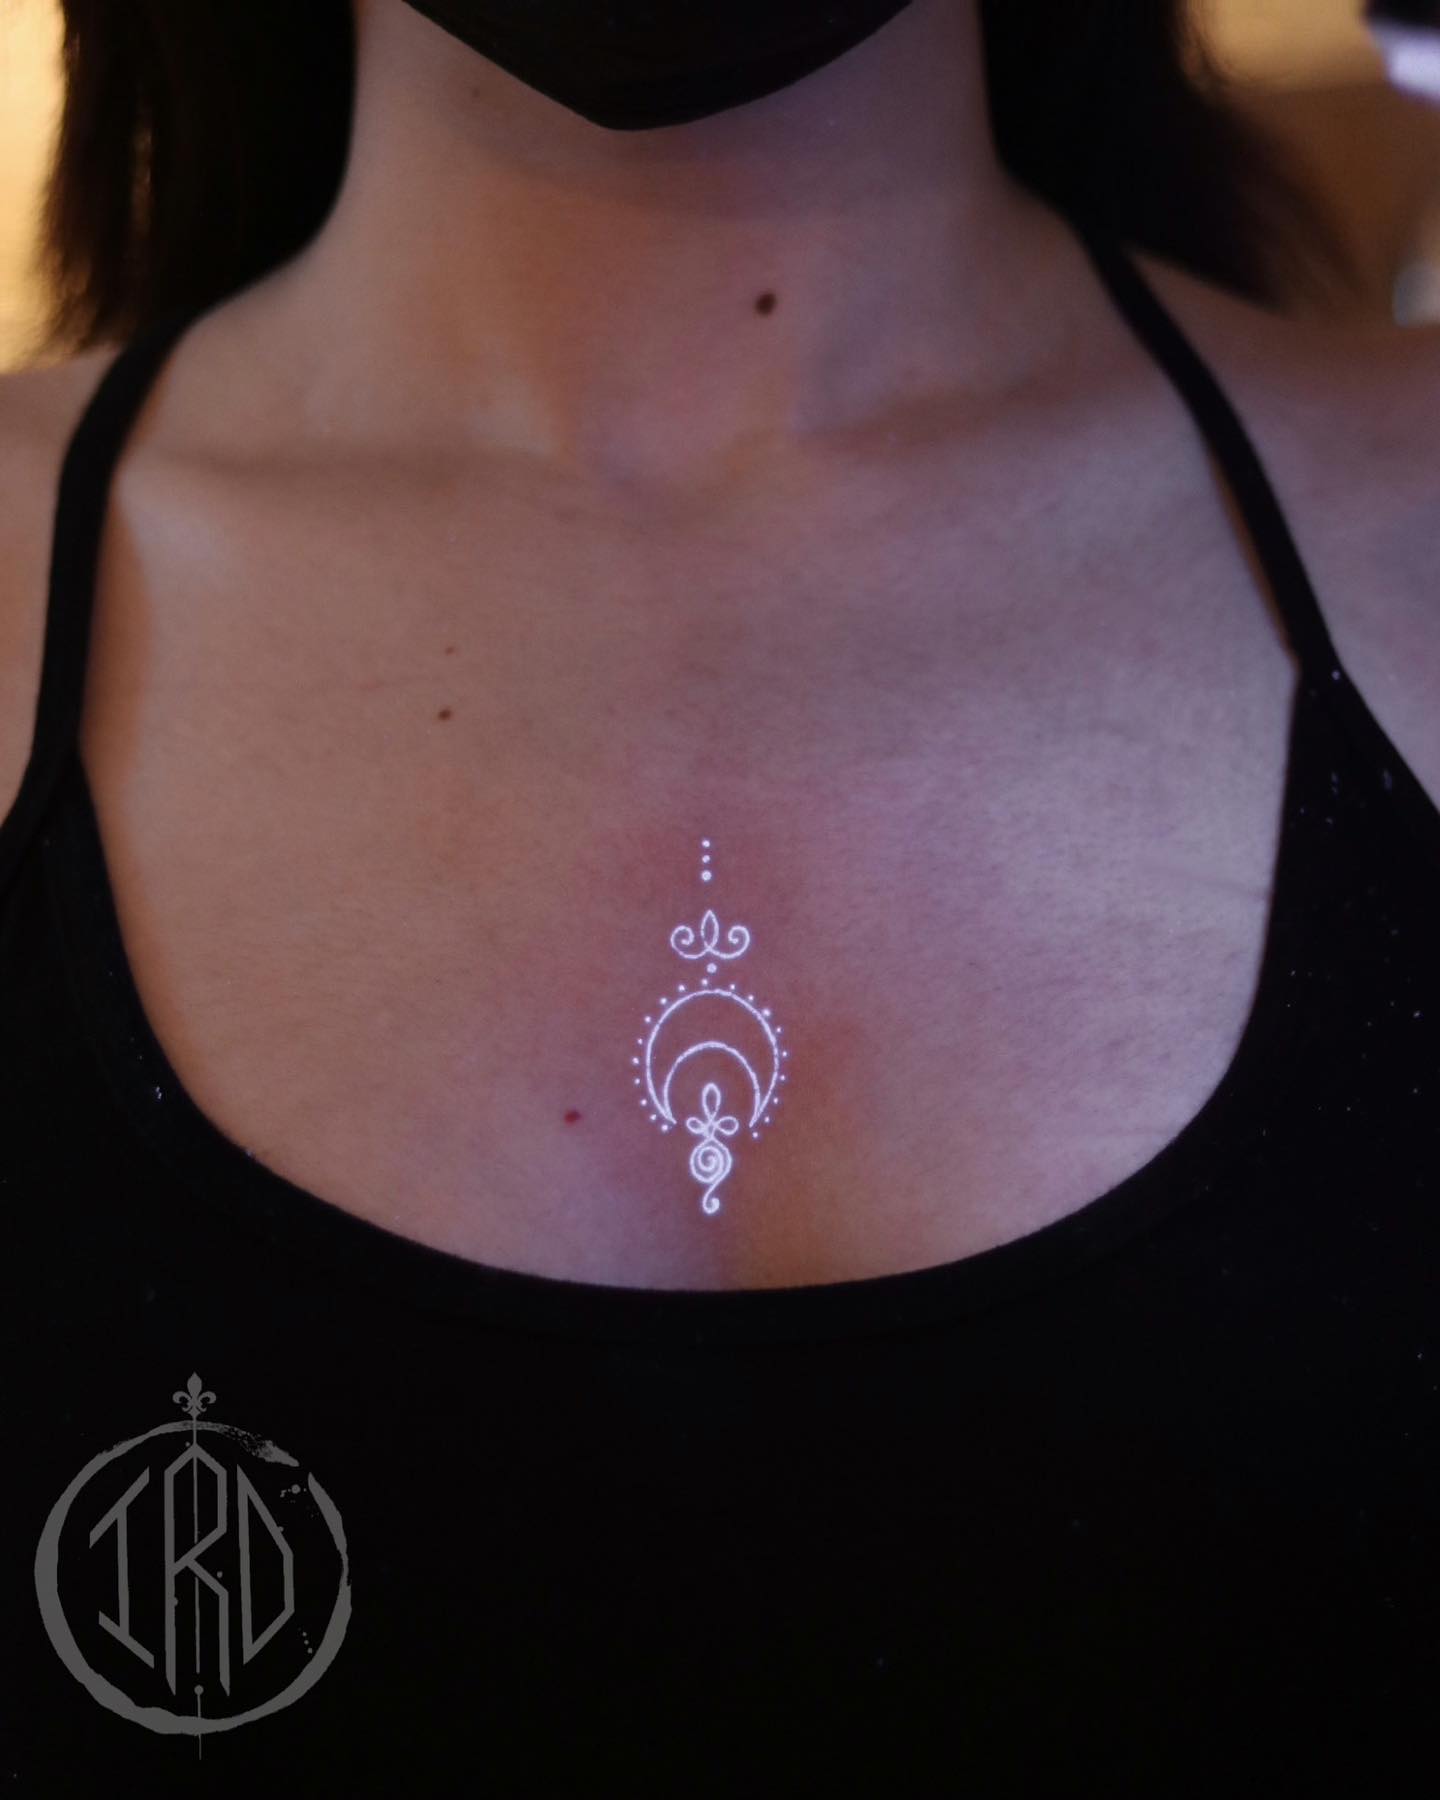 Not only are lunar tattoos beautiful, but they also represent the phases of life. It's a reminder that you're always moving through different stages and phases of your life, and that's OK.